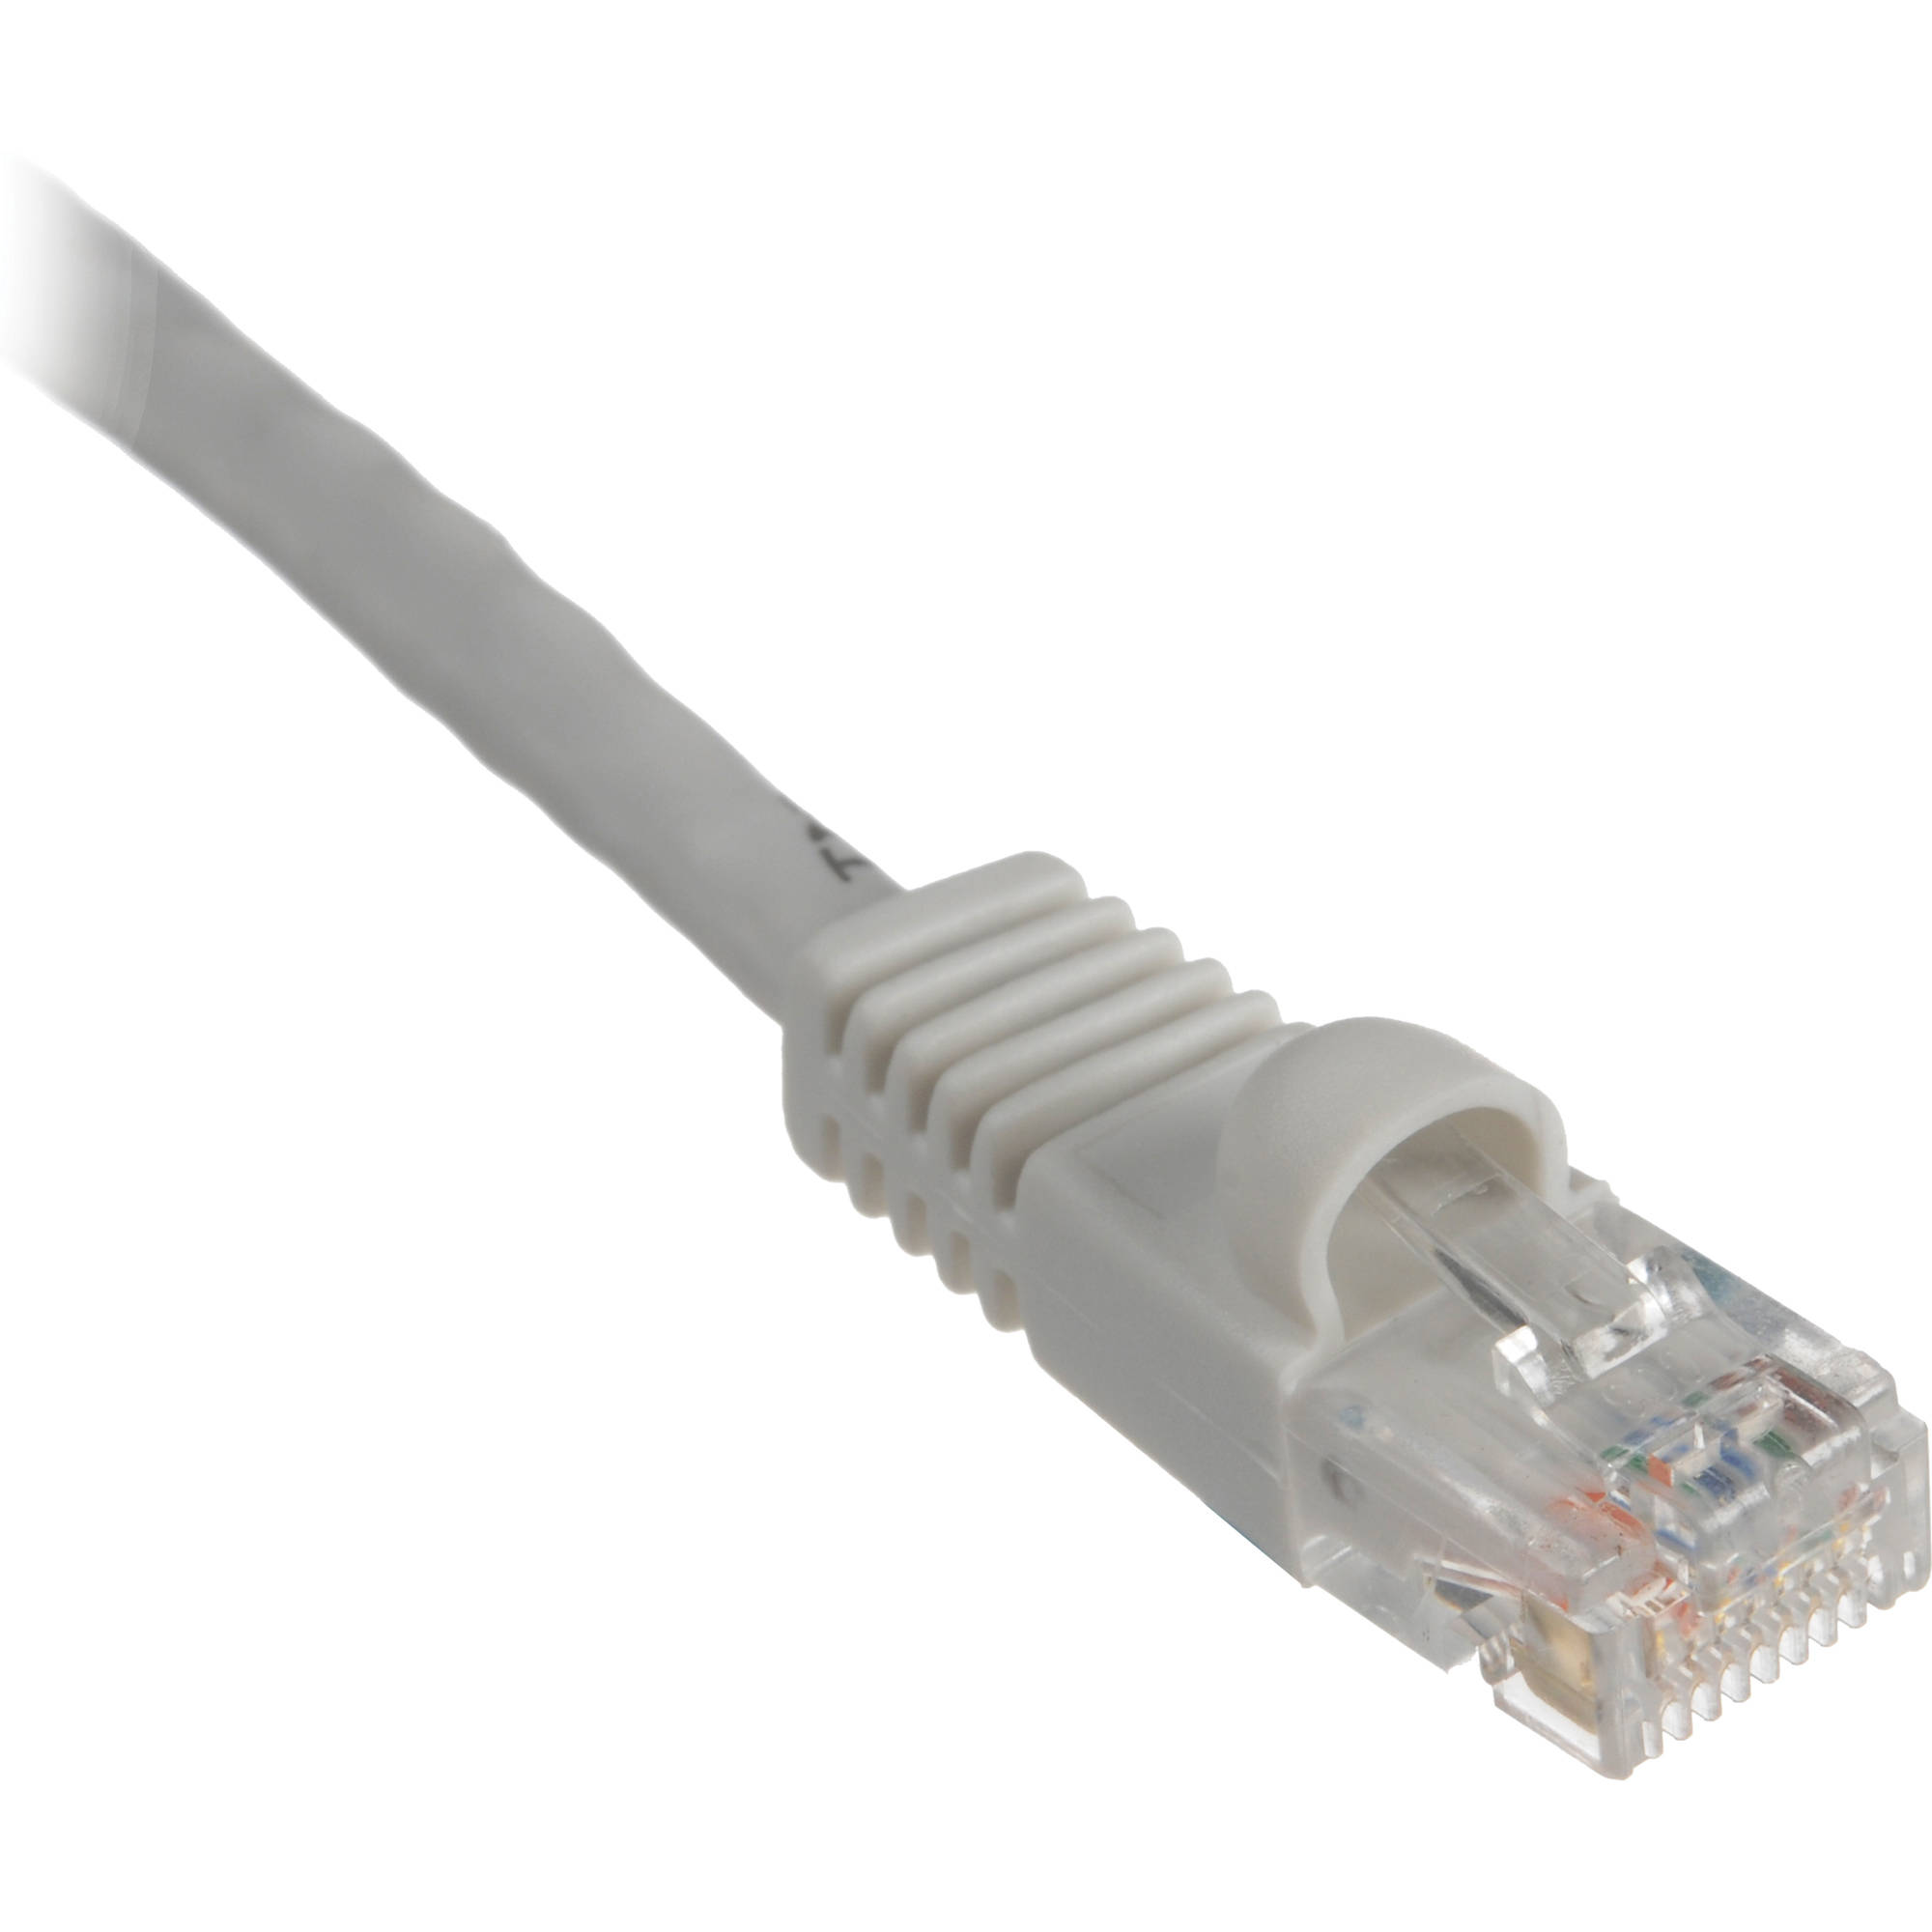 Comprehensive Cat5e 350 MHz Snagless Patch Cable (25', White)